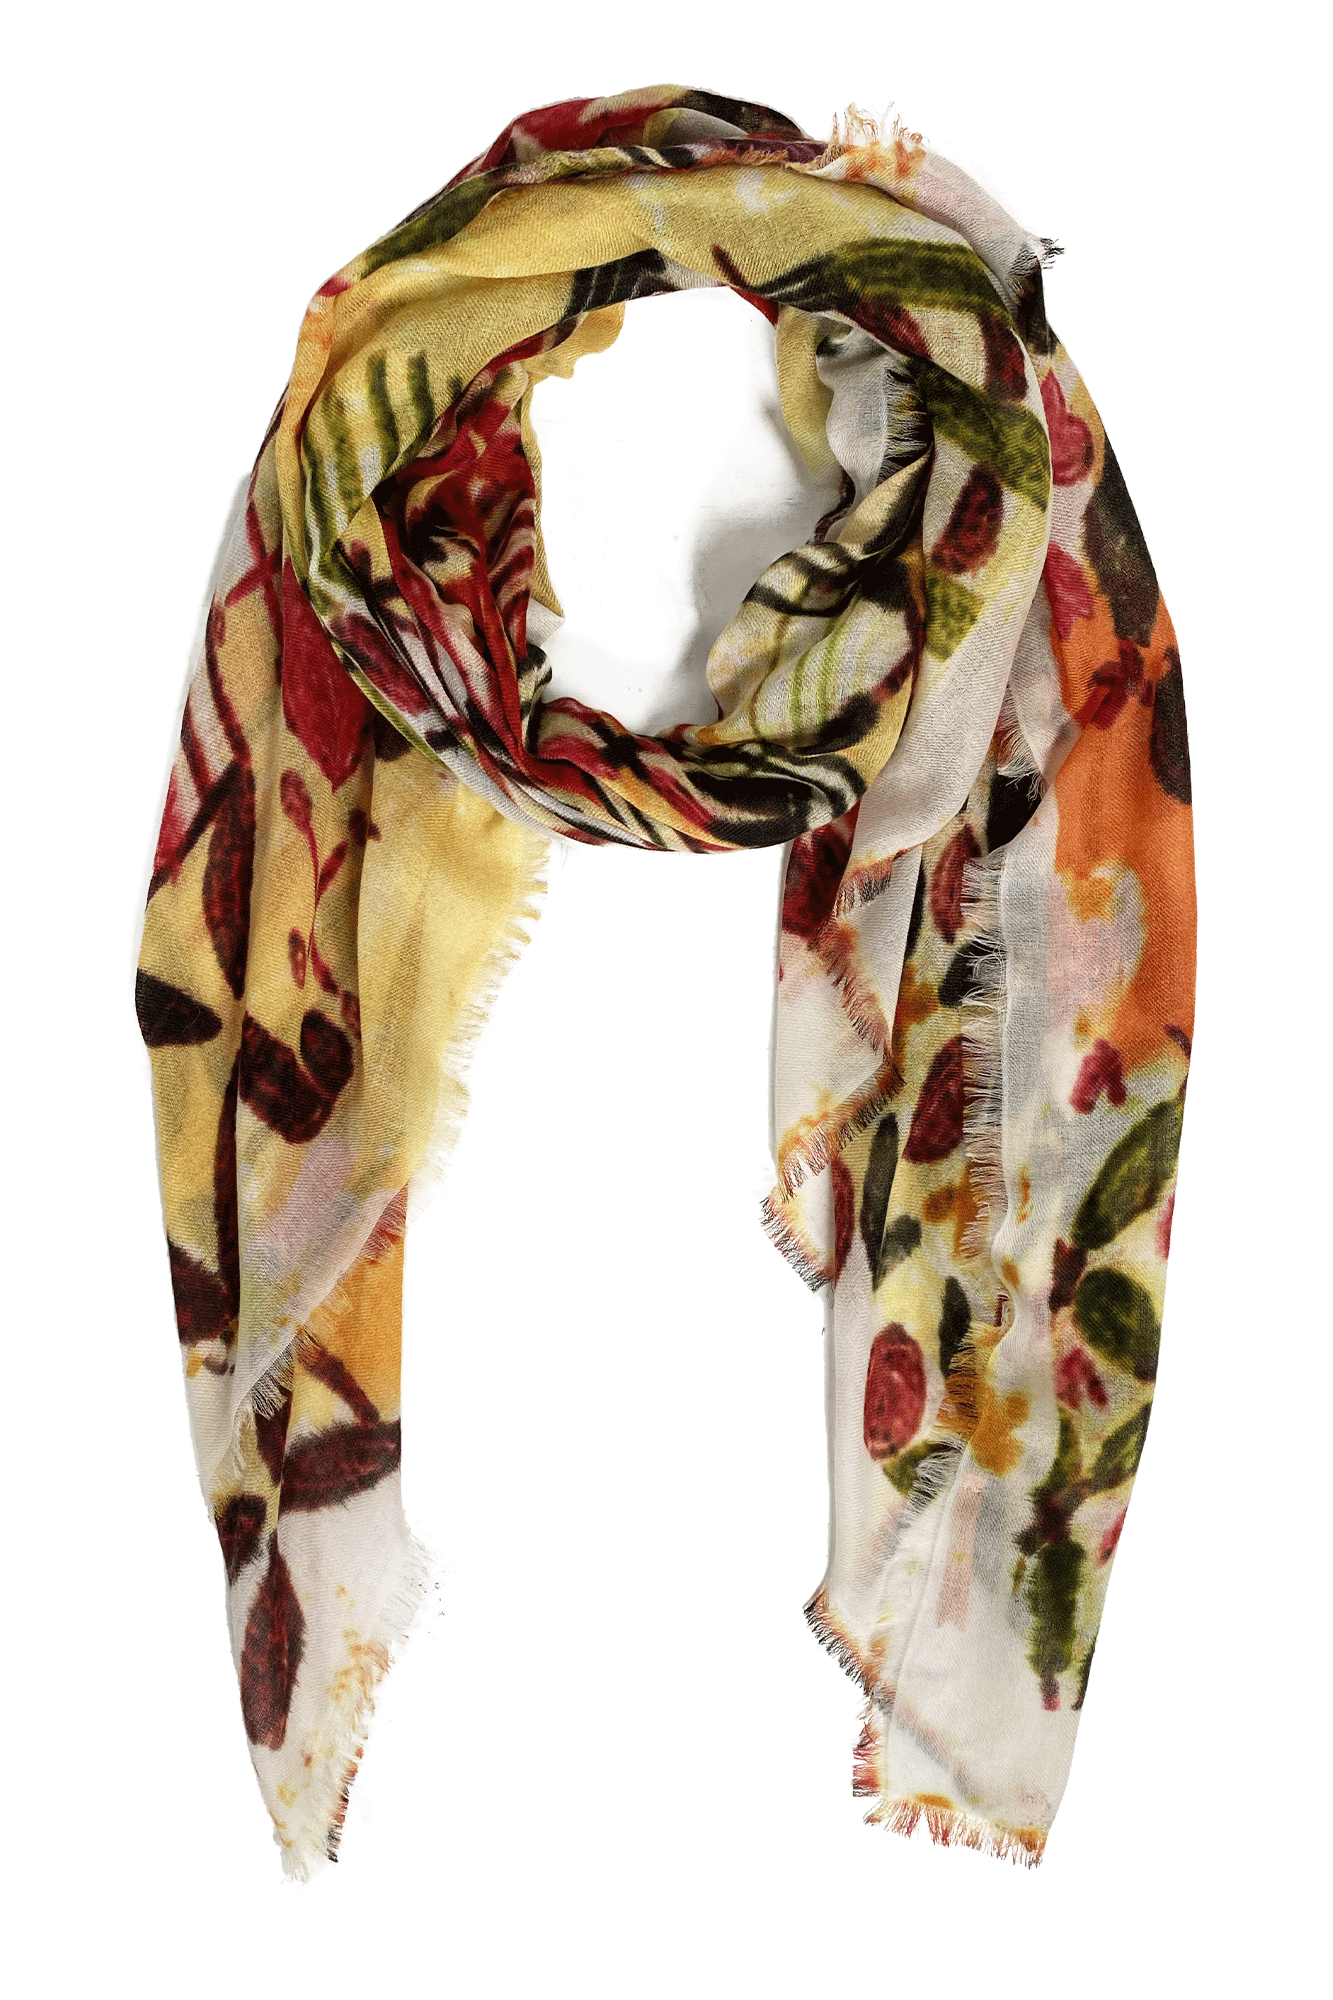 Stay stylish and comfortable with the Happy Yellow/Red Scarf from Ama Pure. This dual-colored scarf features a bright yellow shade on one side and a striking red shade on the other to add a vibrant touch to any look. This scarf is sure to keep you cozy and warm.